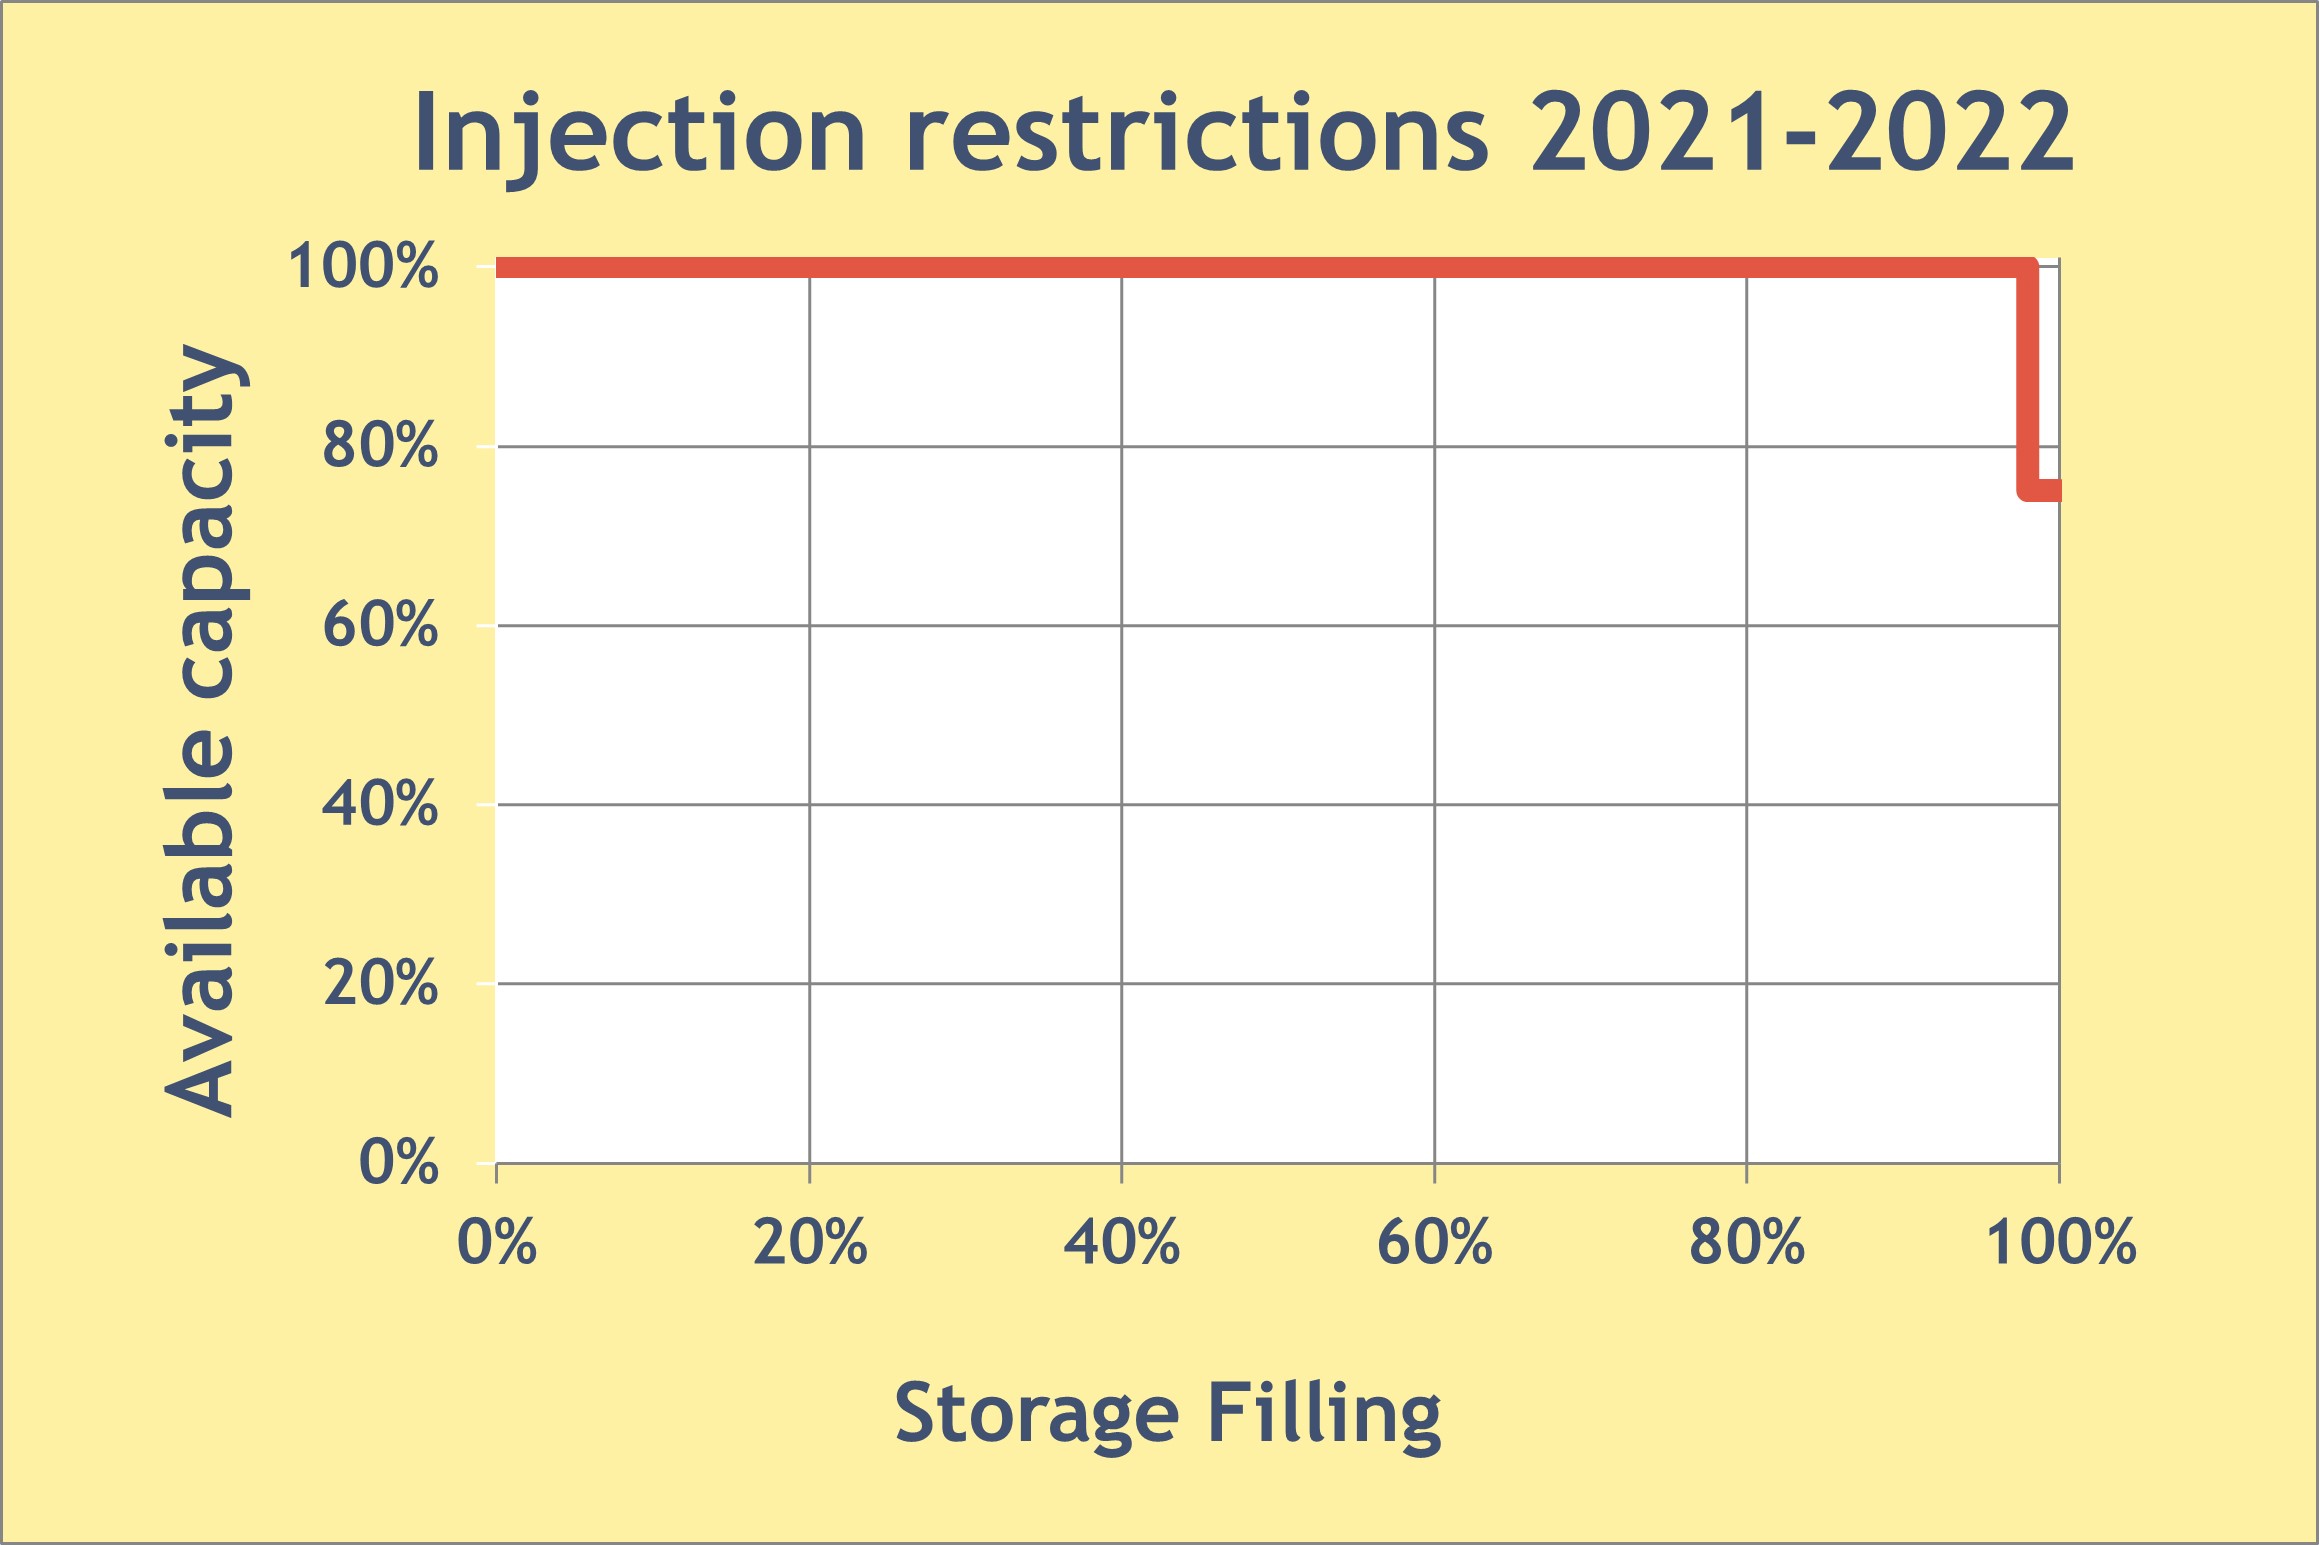 Injection restrictions 2021-2022